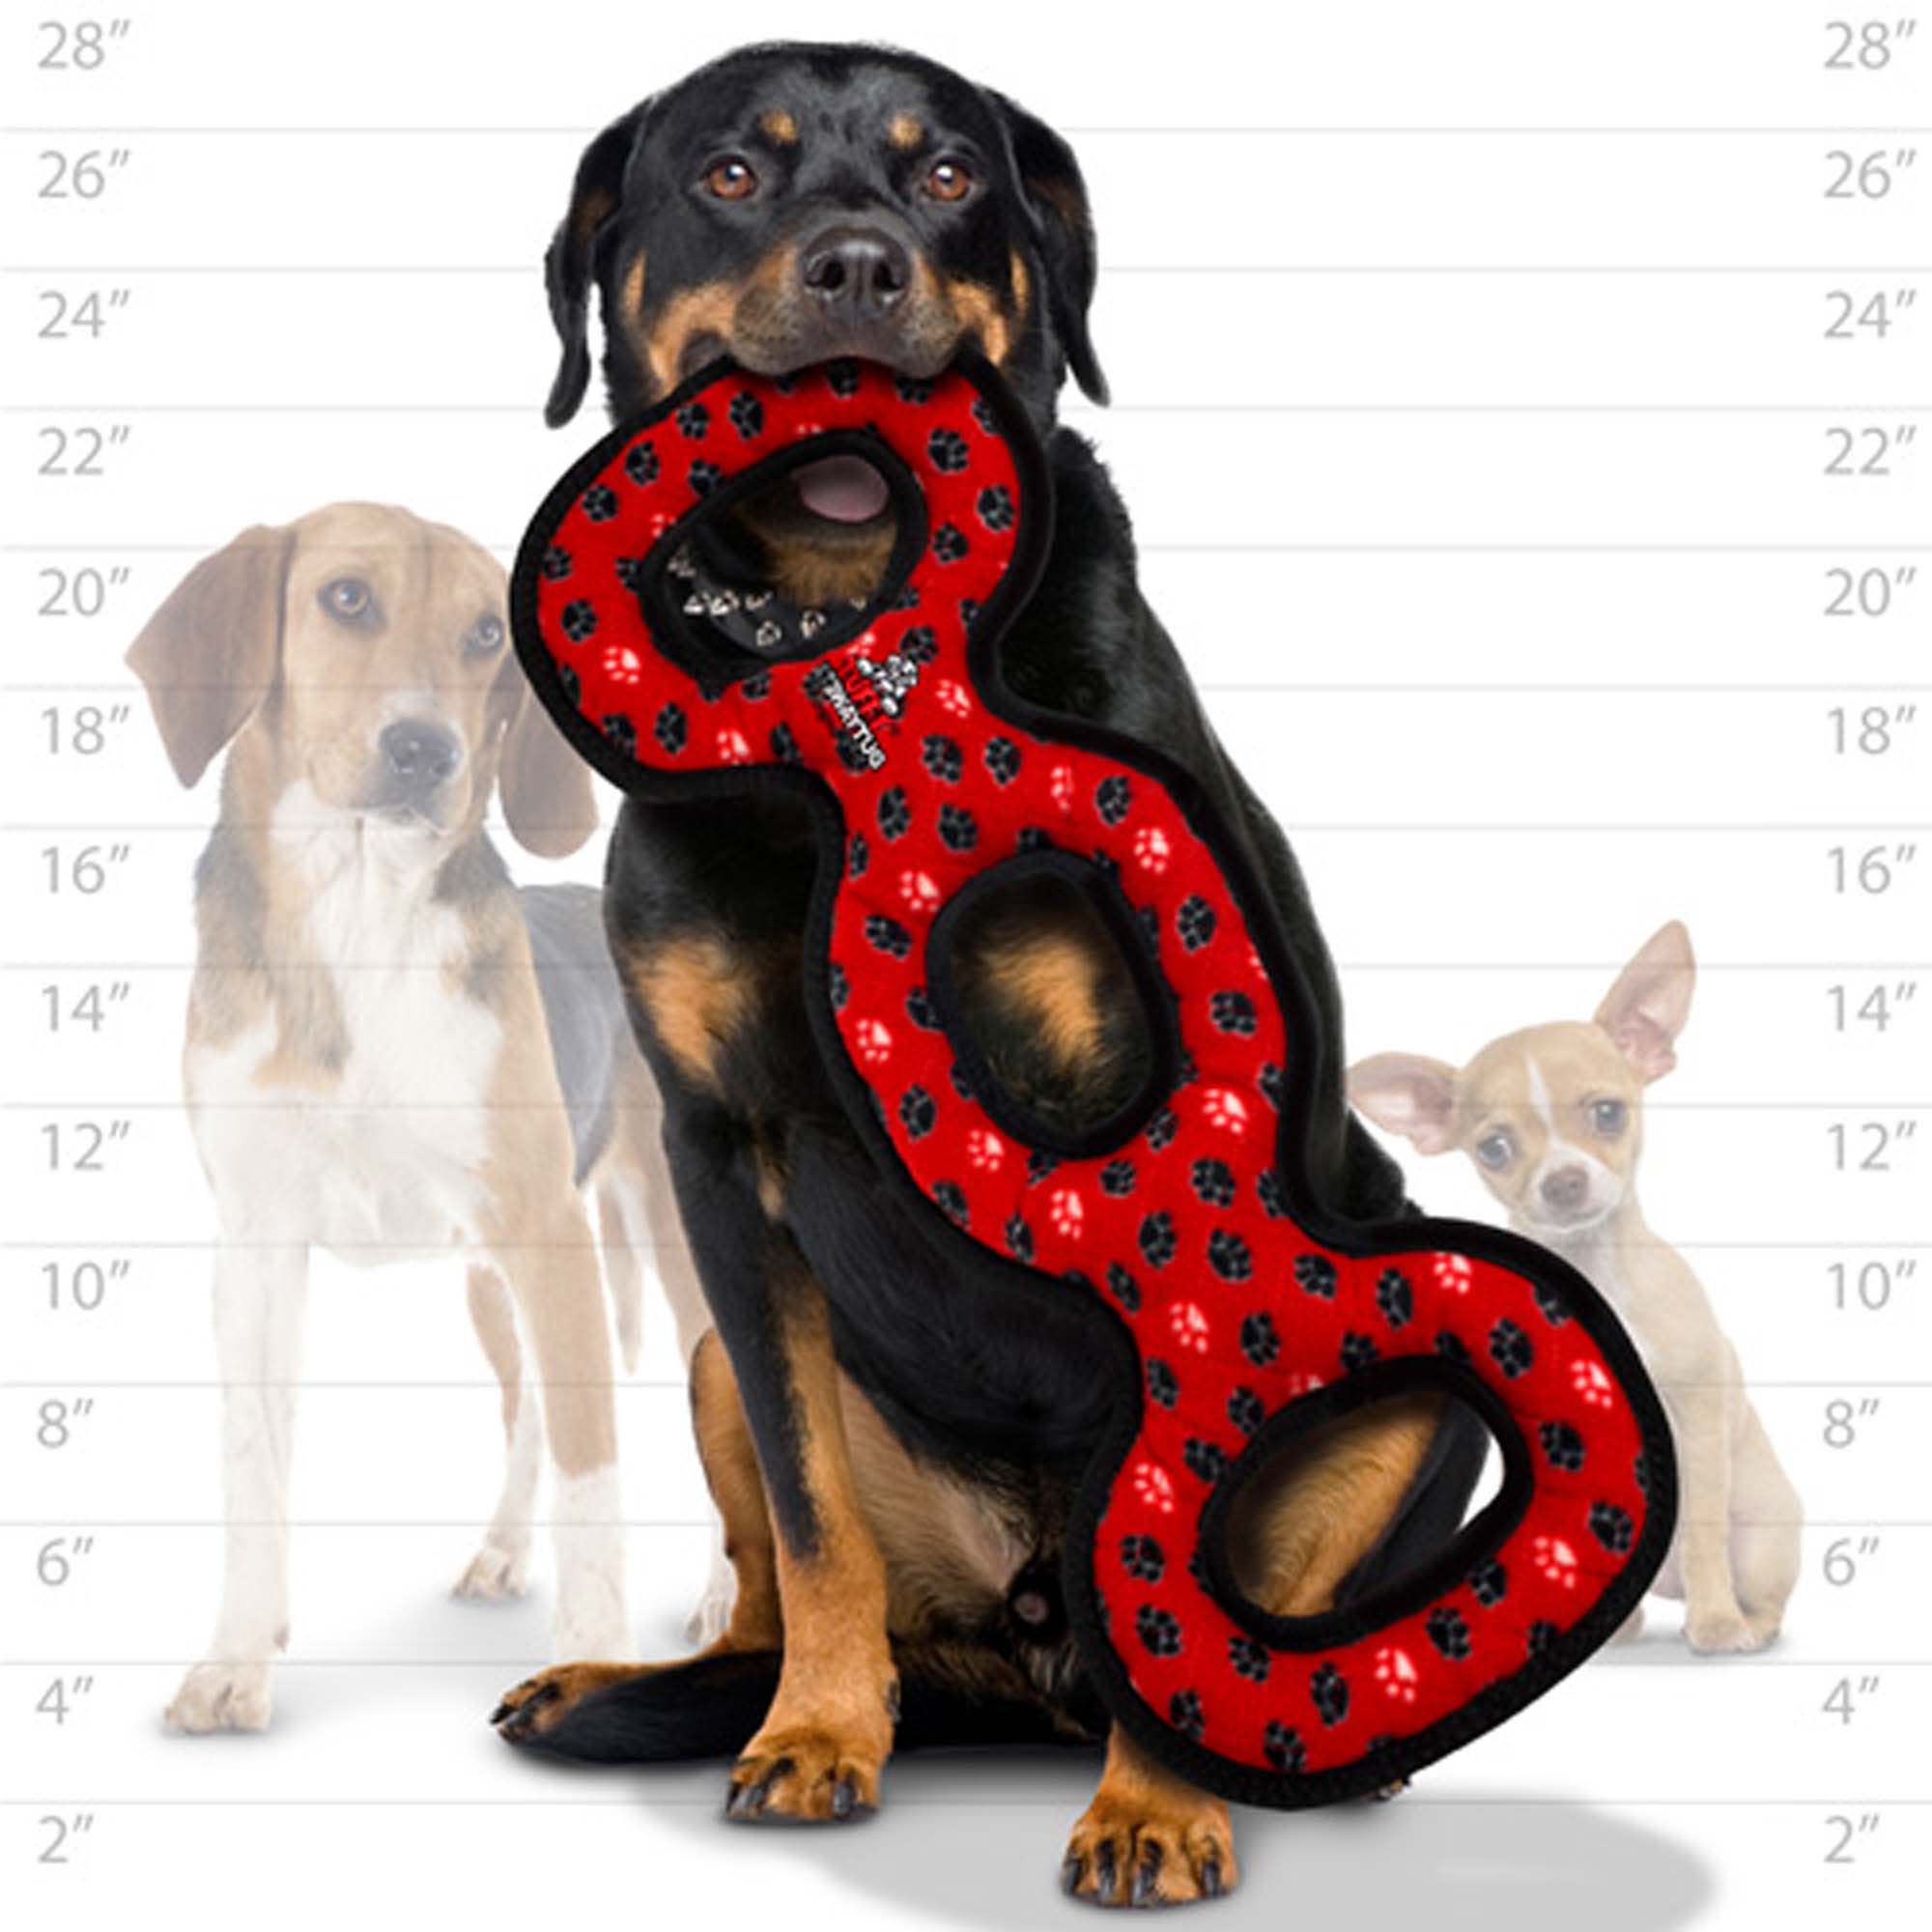 Valentines Day Dog Rope Launchers Decompression Toys Tease Cat Novelty Toys  High Speed Dual Motor Dog Self Play (red, One Size)